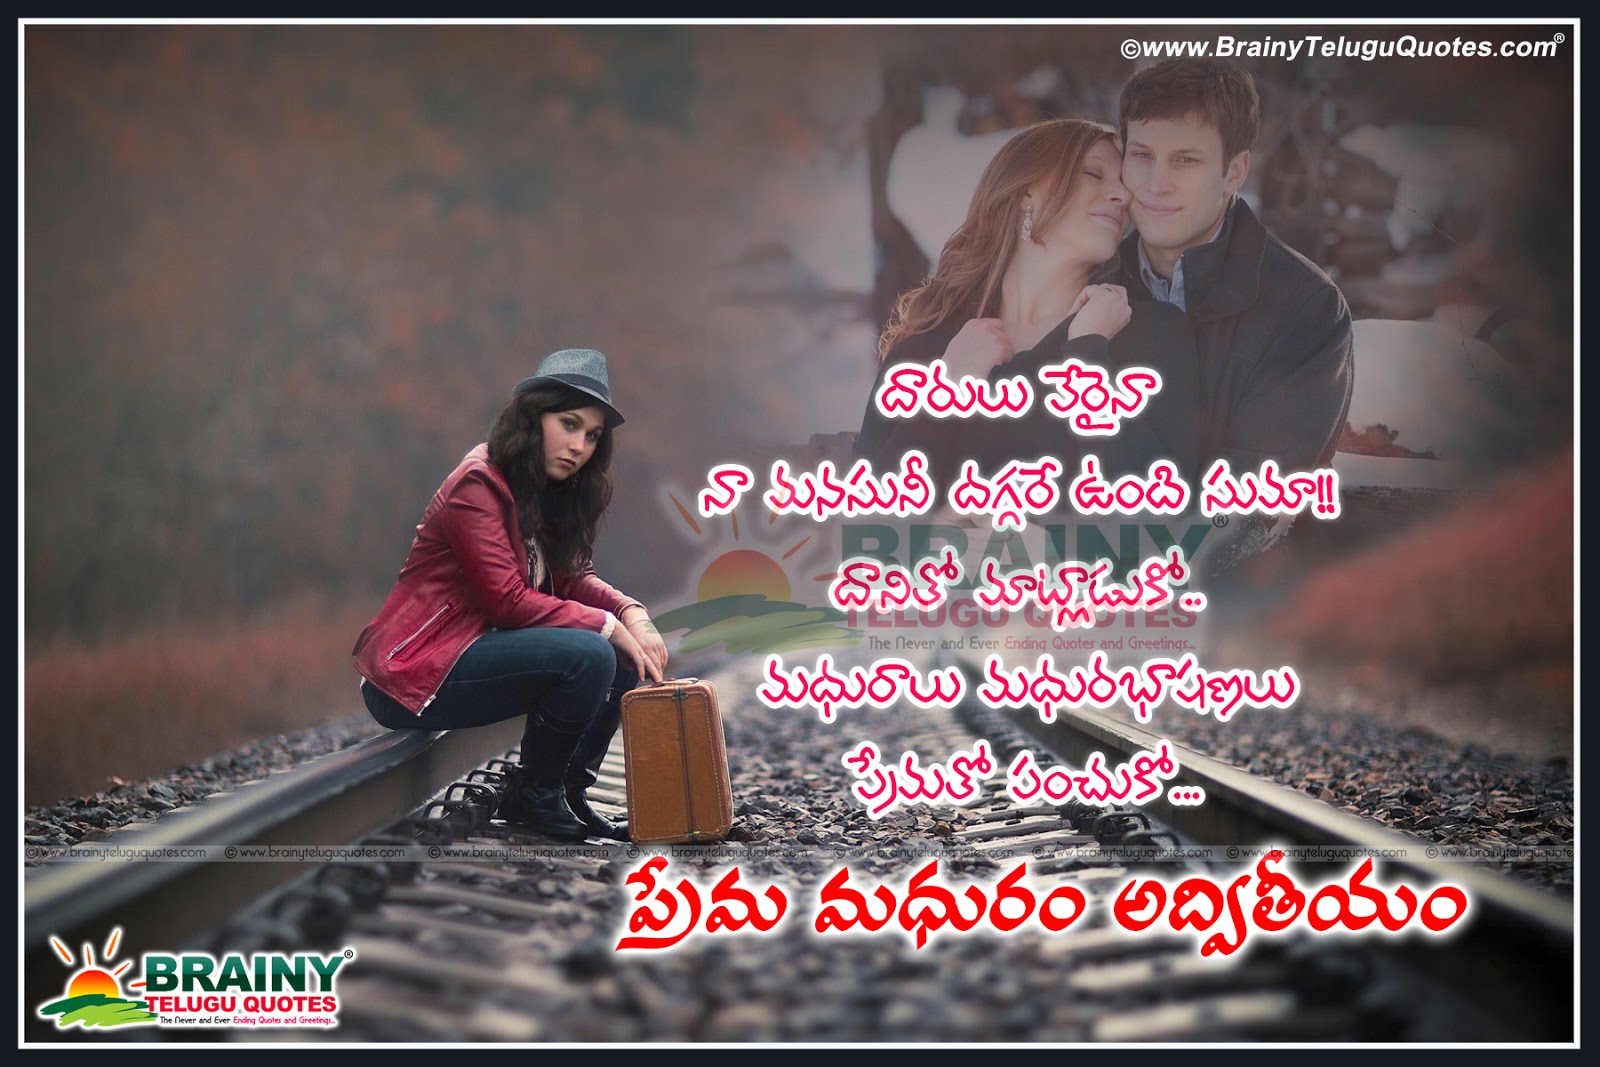 Here is a Telugu Whatsapp Love True Love Quotes and Messages for New Love